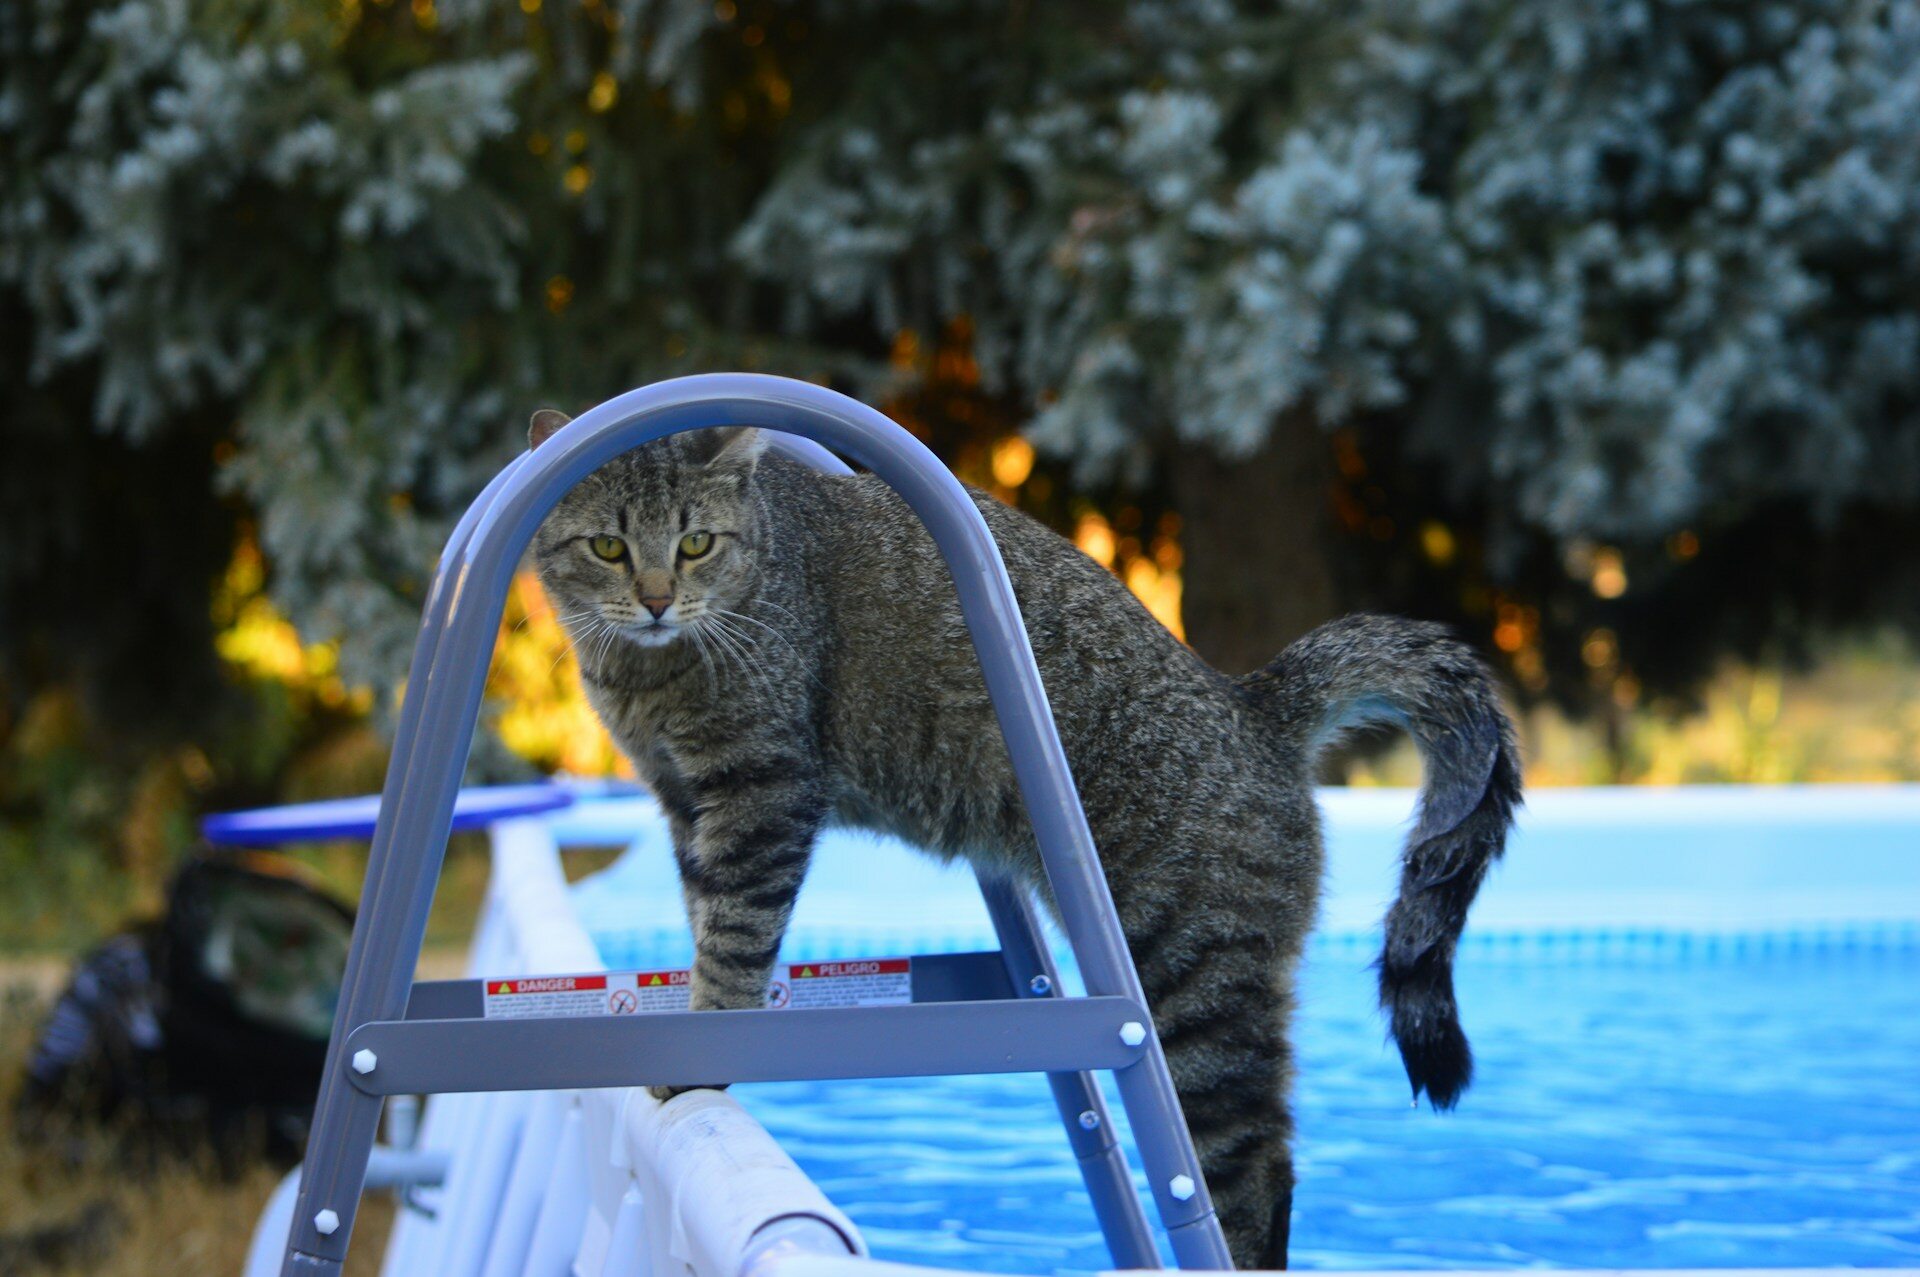 A cat sitting by a ladder next to a swimming pool